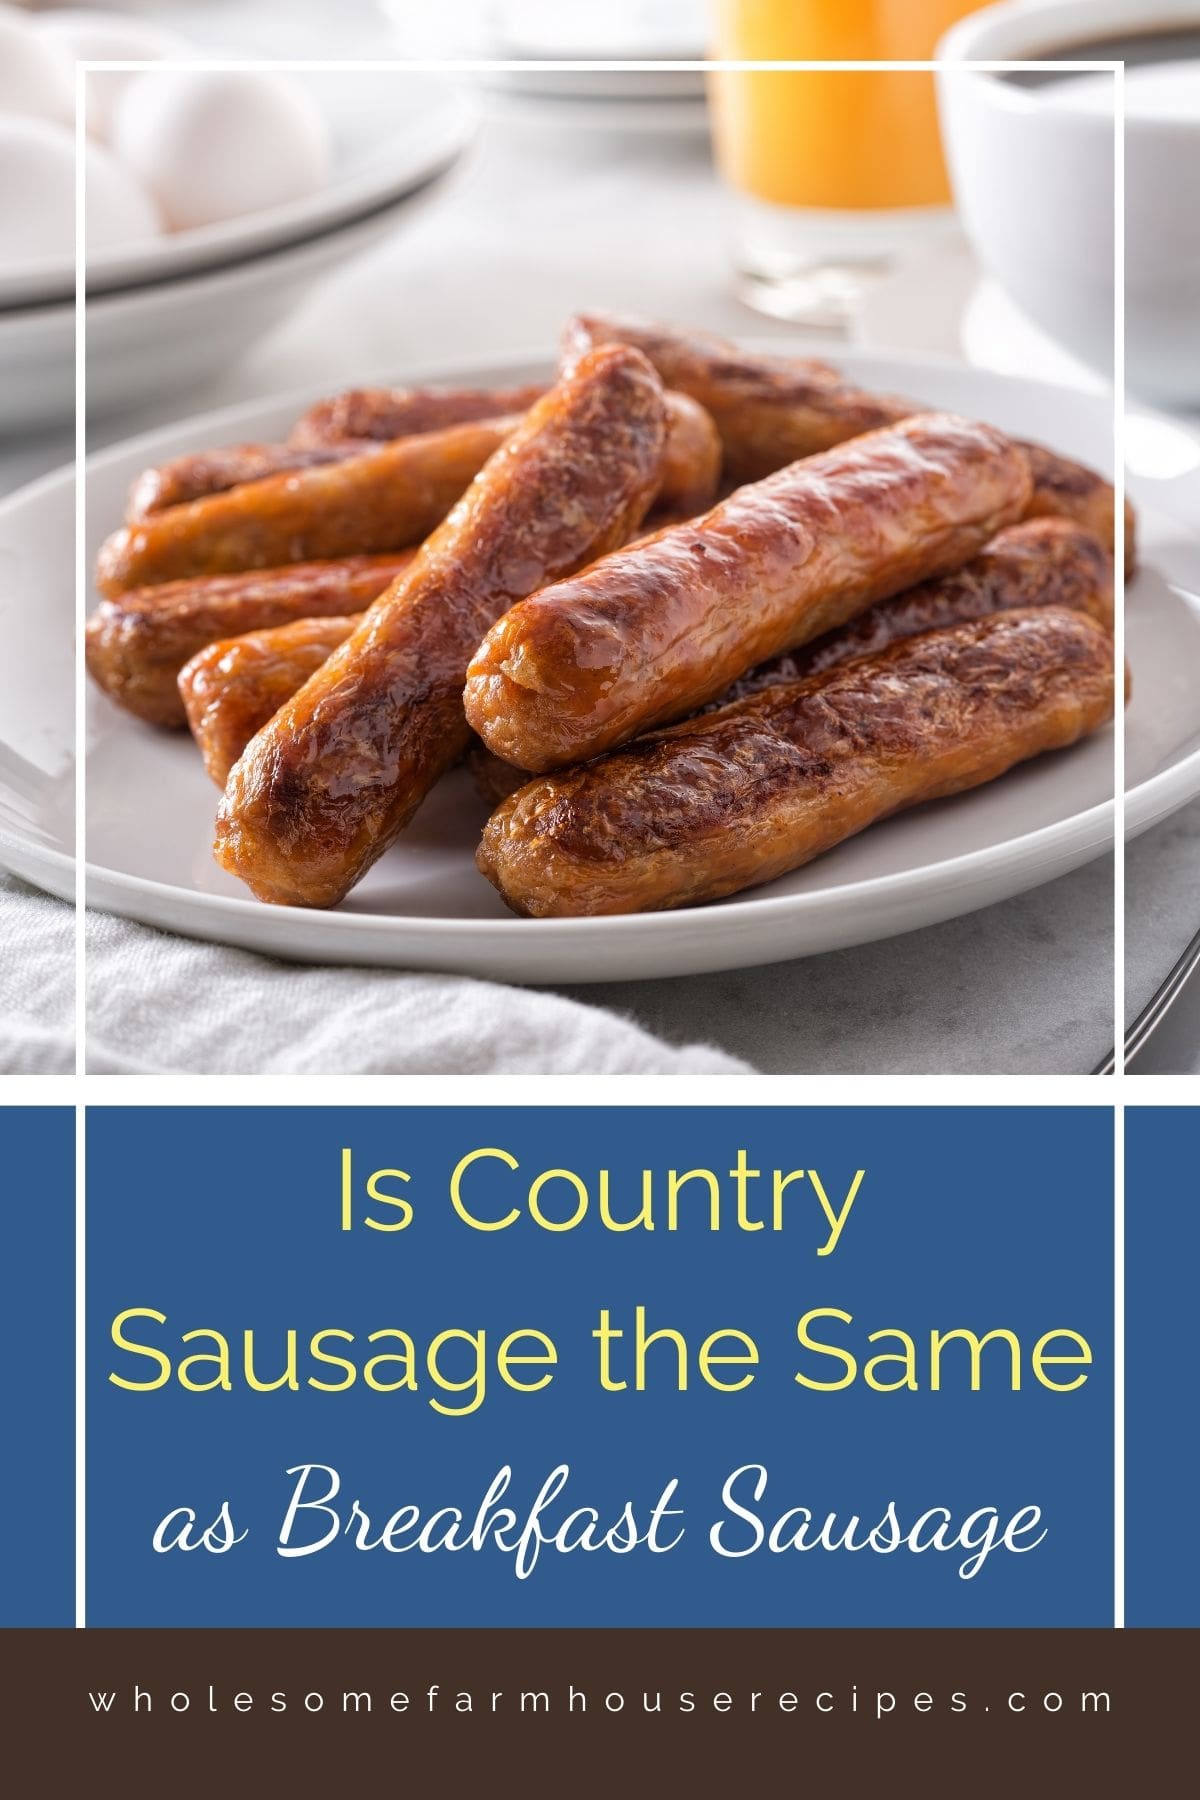 Is Country Sausage the Same as Breakfast Sausage